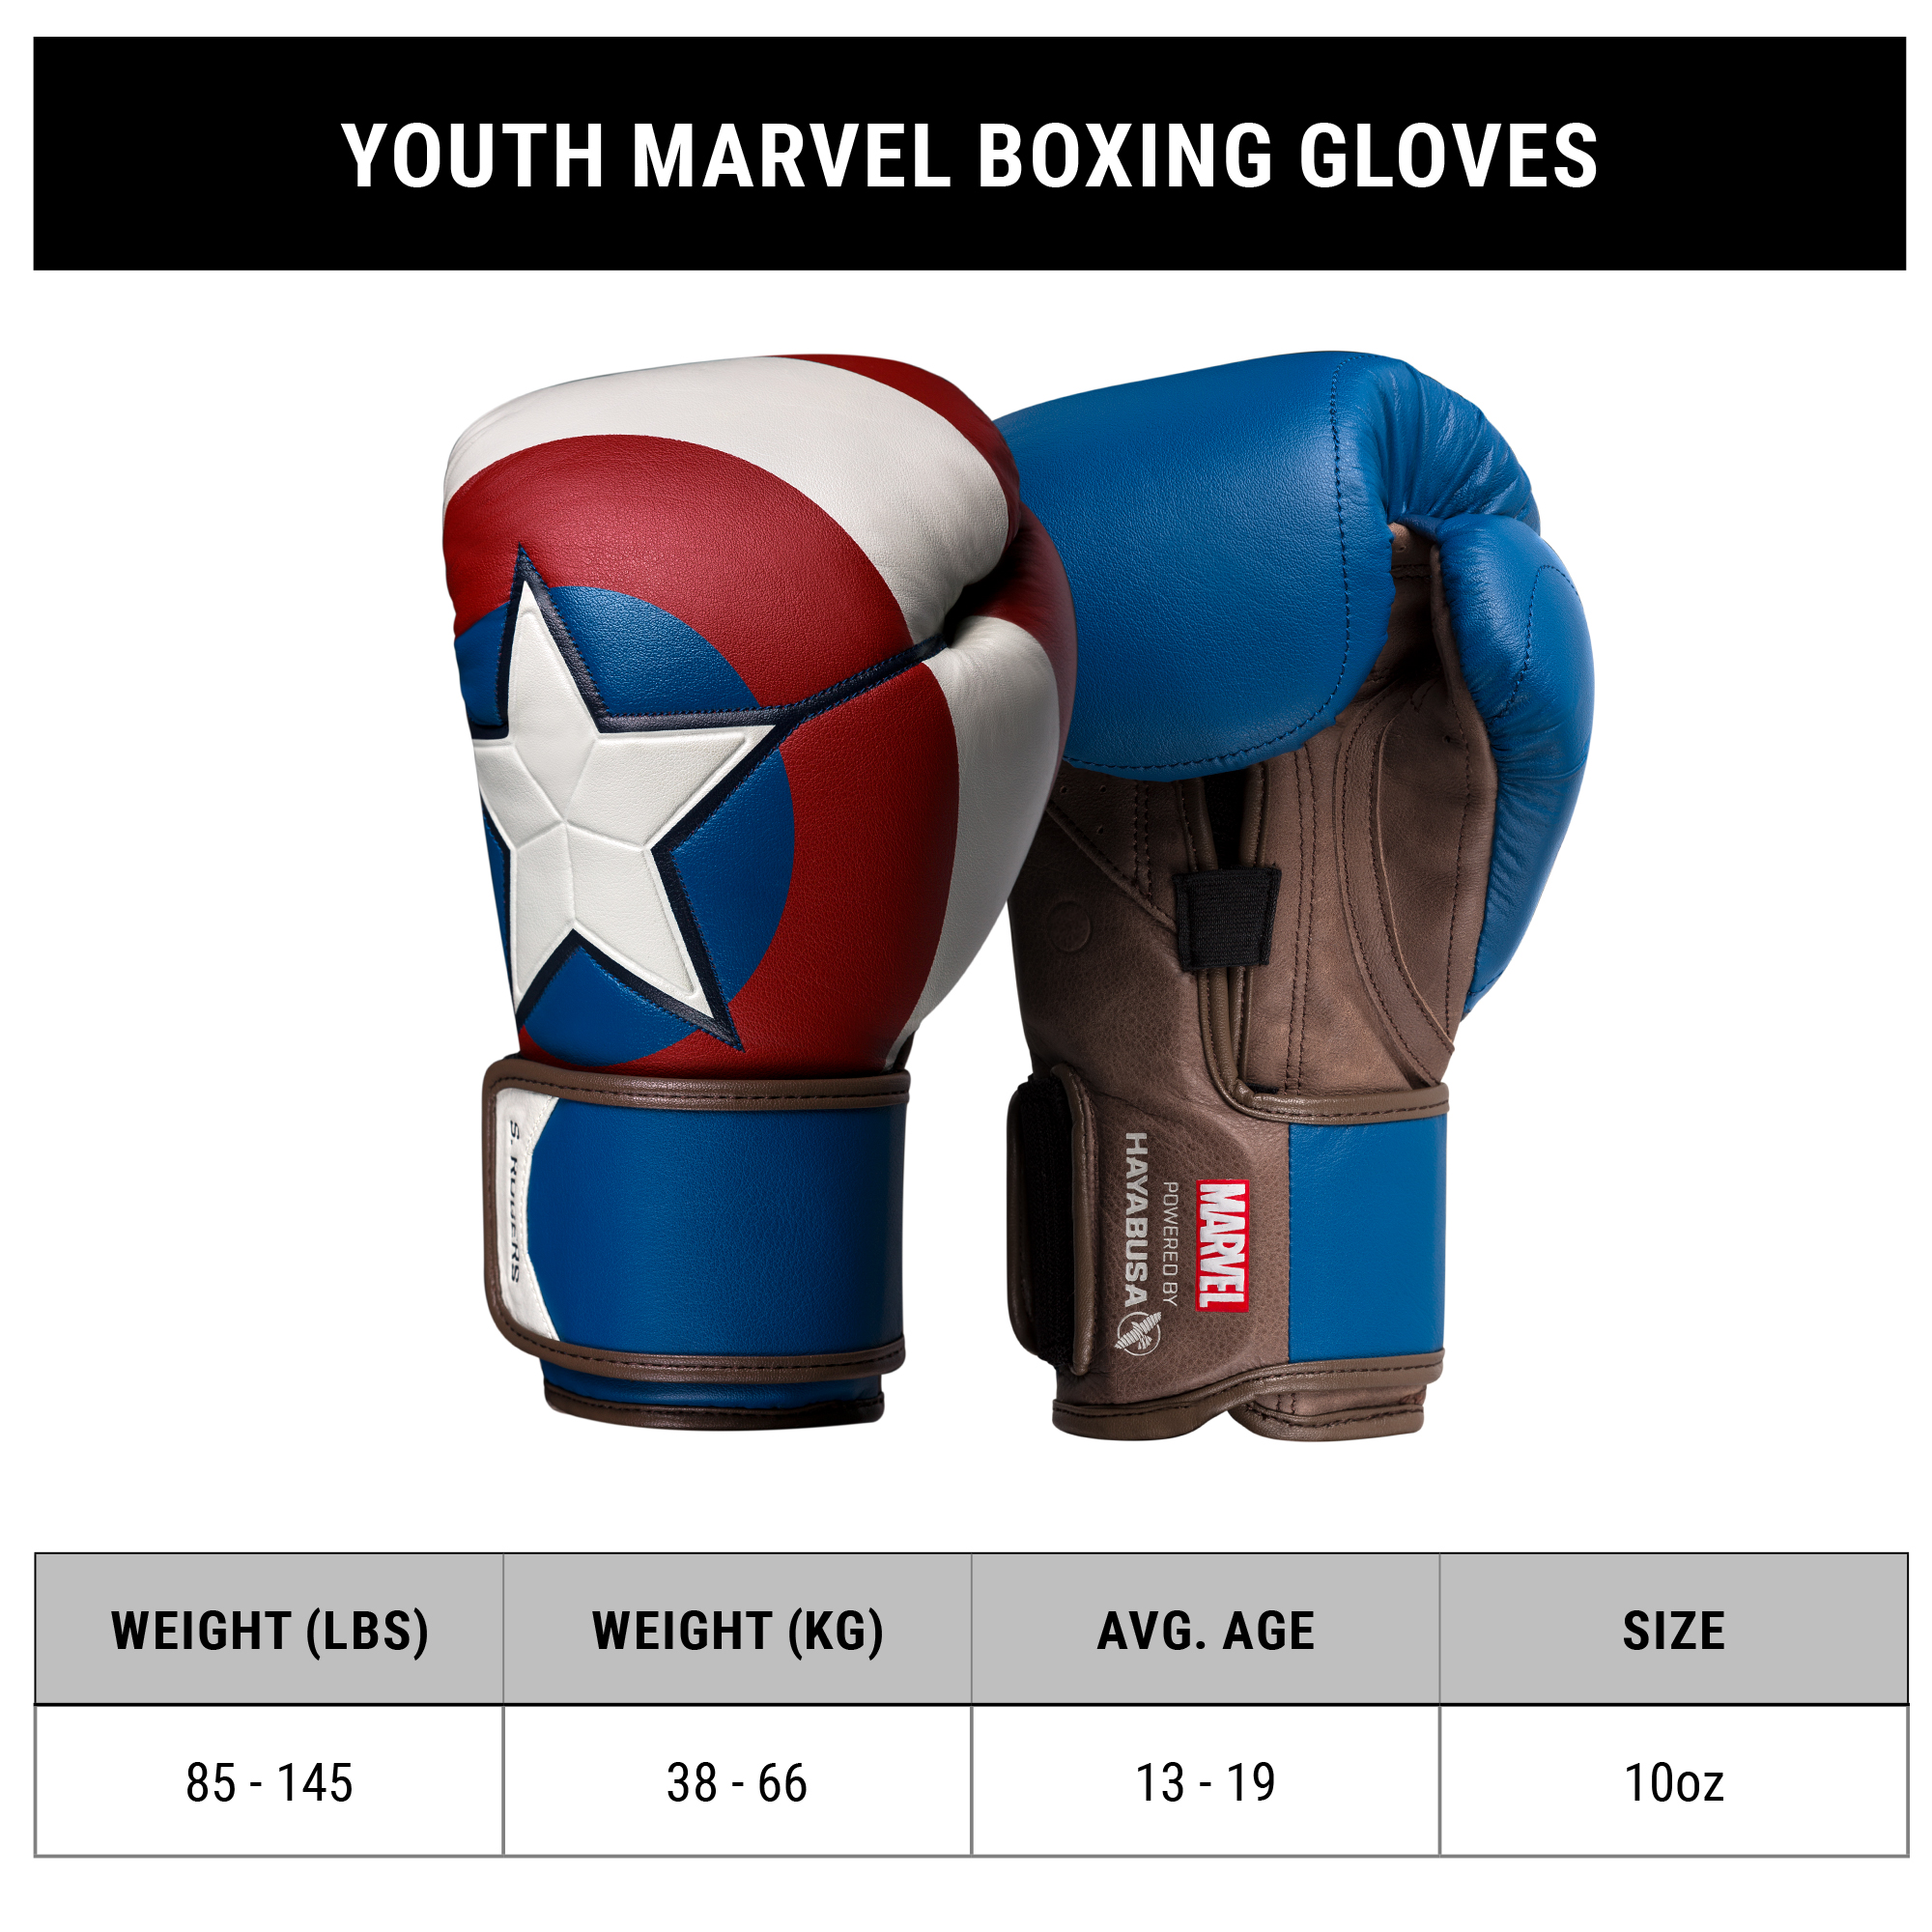 Marvel's Youth Captain America Boxing Gloves